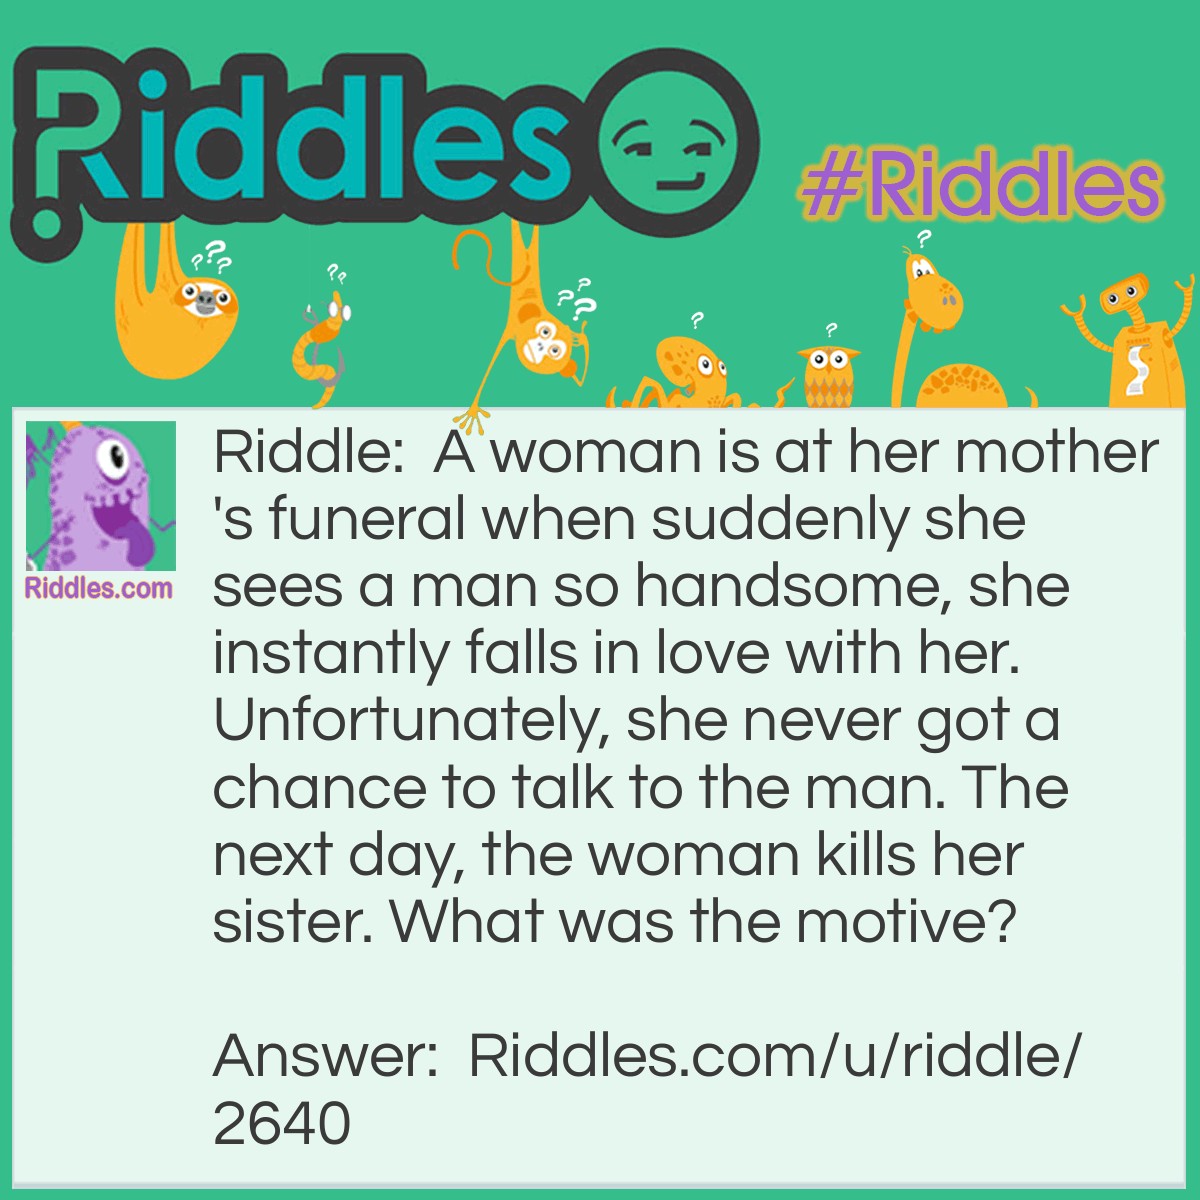 Riddle: A woman is at her <a href="https://www.riddles.com/quiz/mothers-day-riddles">mother's</a> funeral when suddenly she sees a man so handsome, she instantly falls in love with her. Unfortunately, she never got a chance to talk to the man. The next day, the woman kills her sister. What was the motive? Answer: The woman was hoping to see the man again. If you got this correct on the first try, you have the mind of a psychopath.